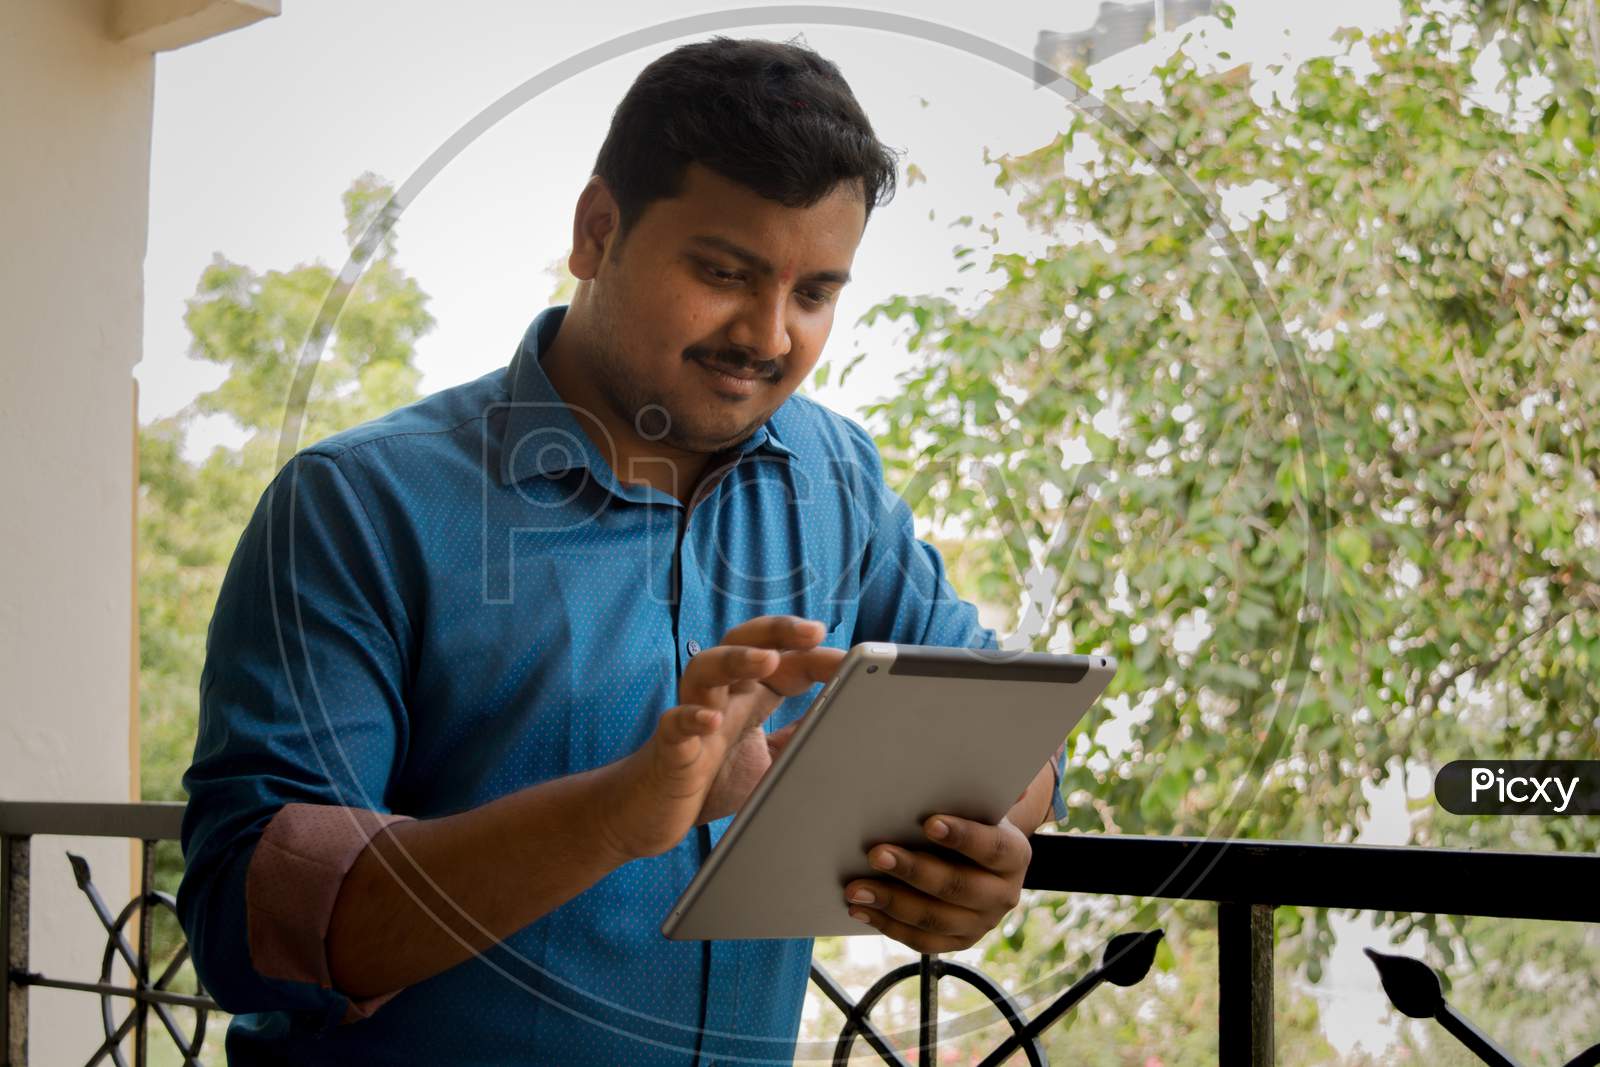 A Young Indian Man Using Tablet Gadget or iPad